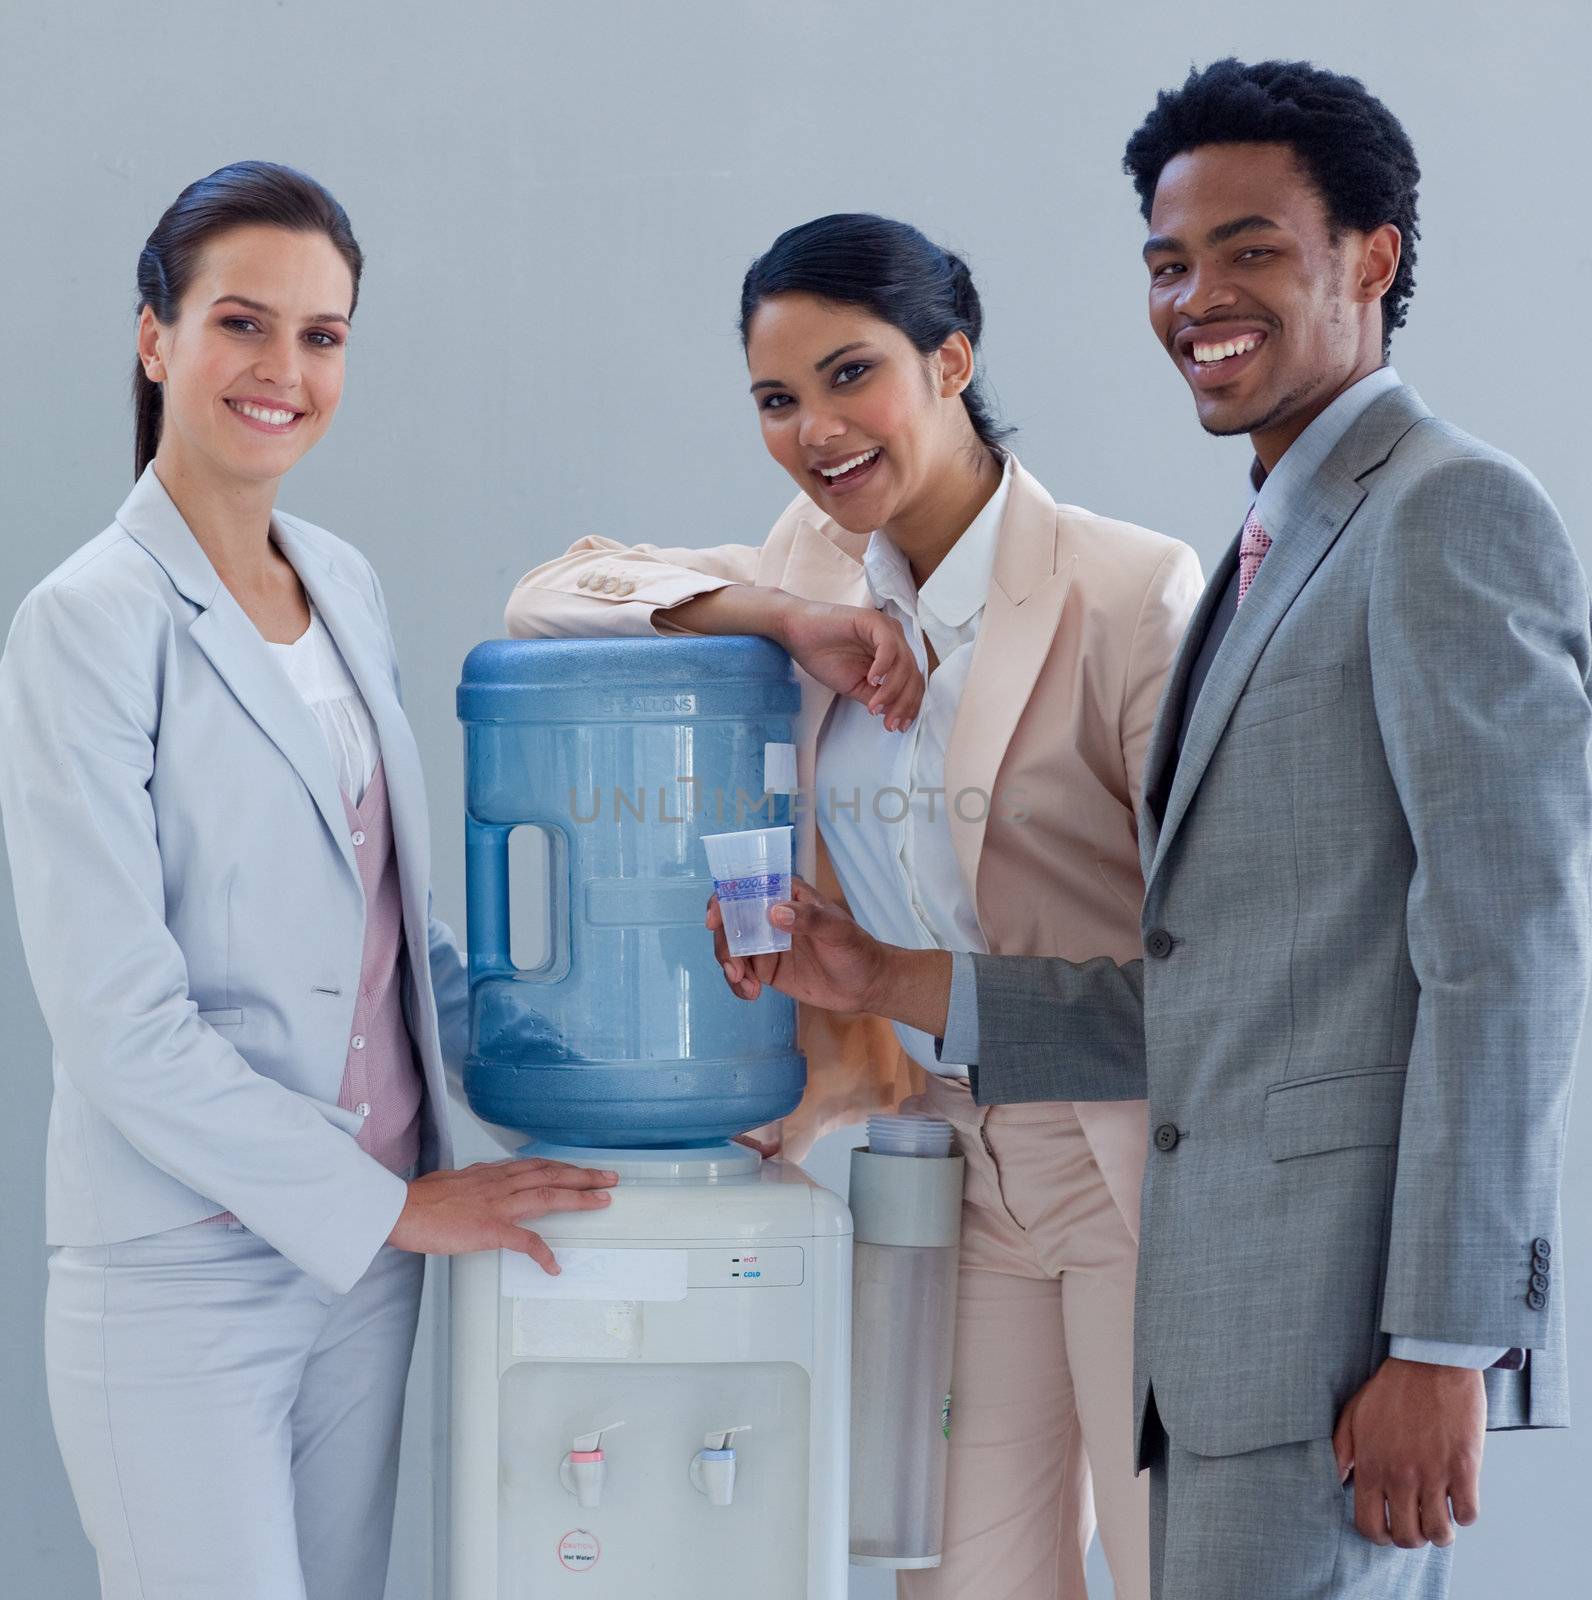 Smiling business people speaking next to a water cooler in office